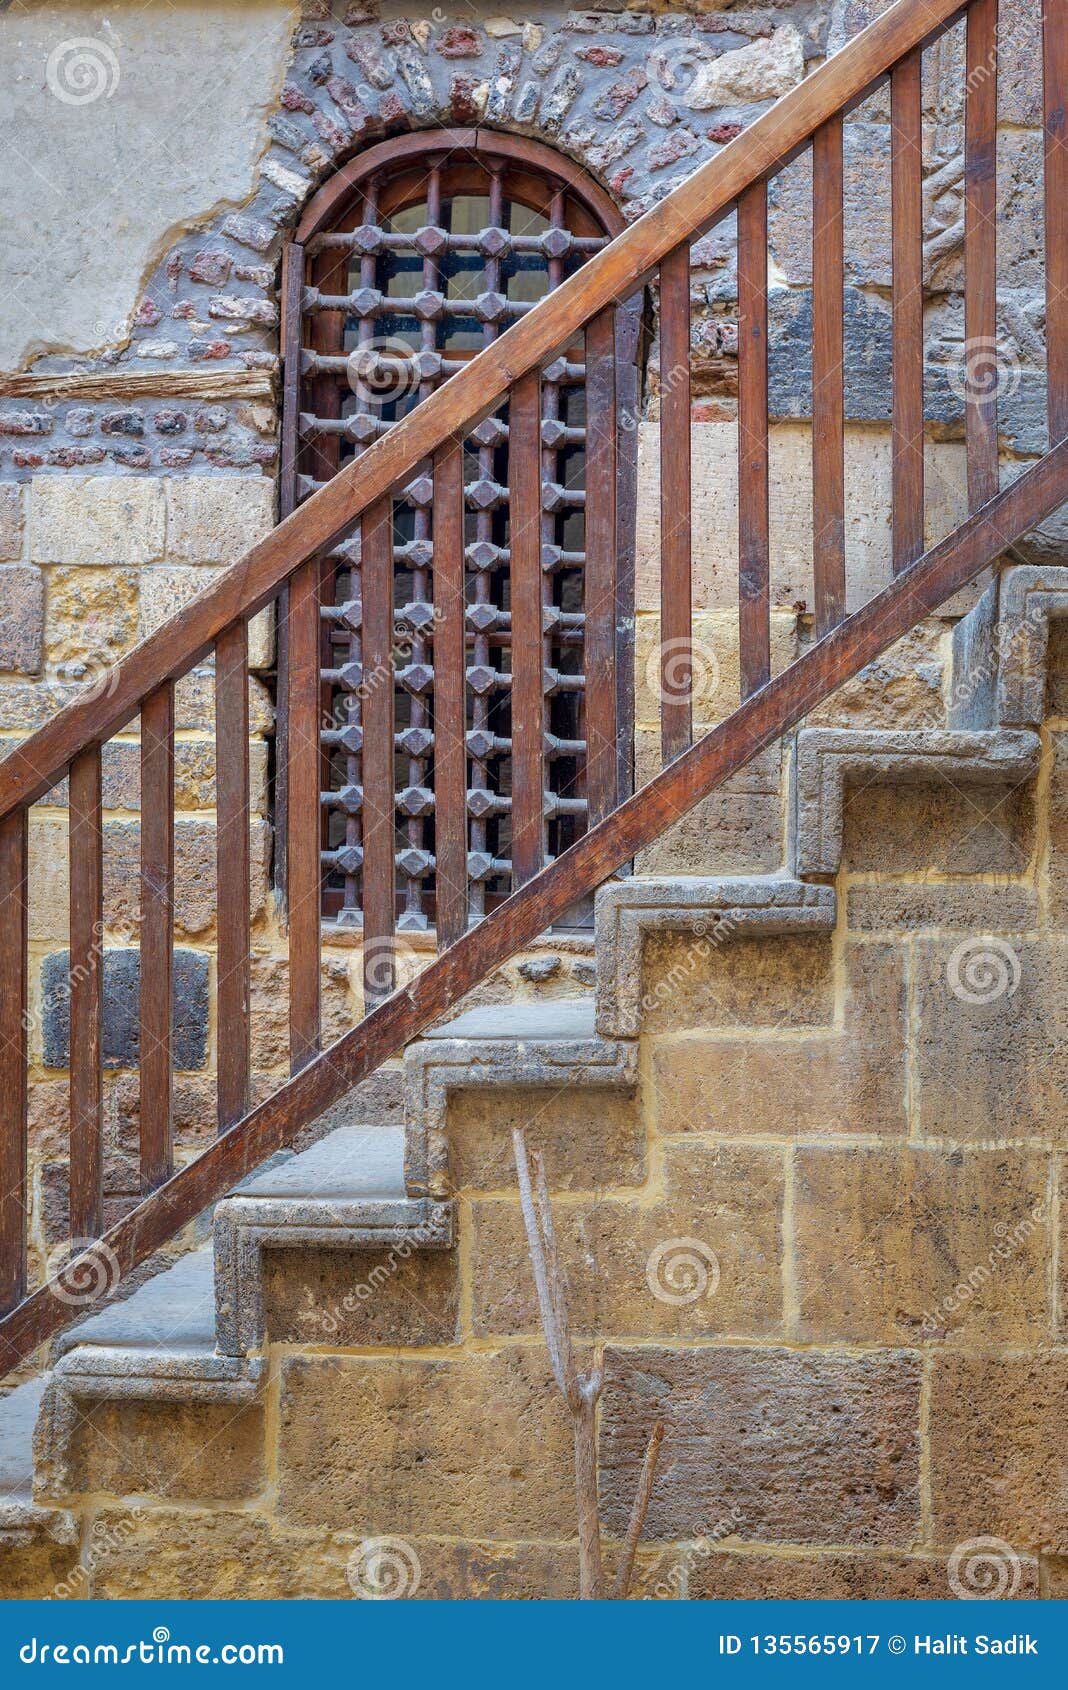 wooden window and staircase with wooden balustrade leading to historic beit el set waseela building, old cairo, egypt